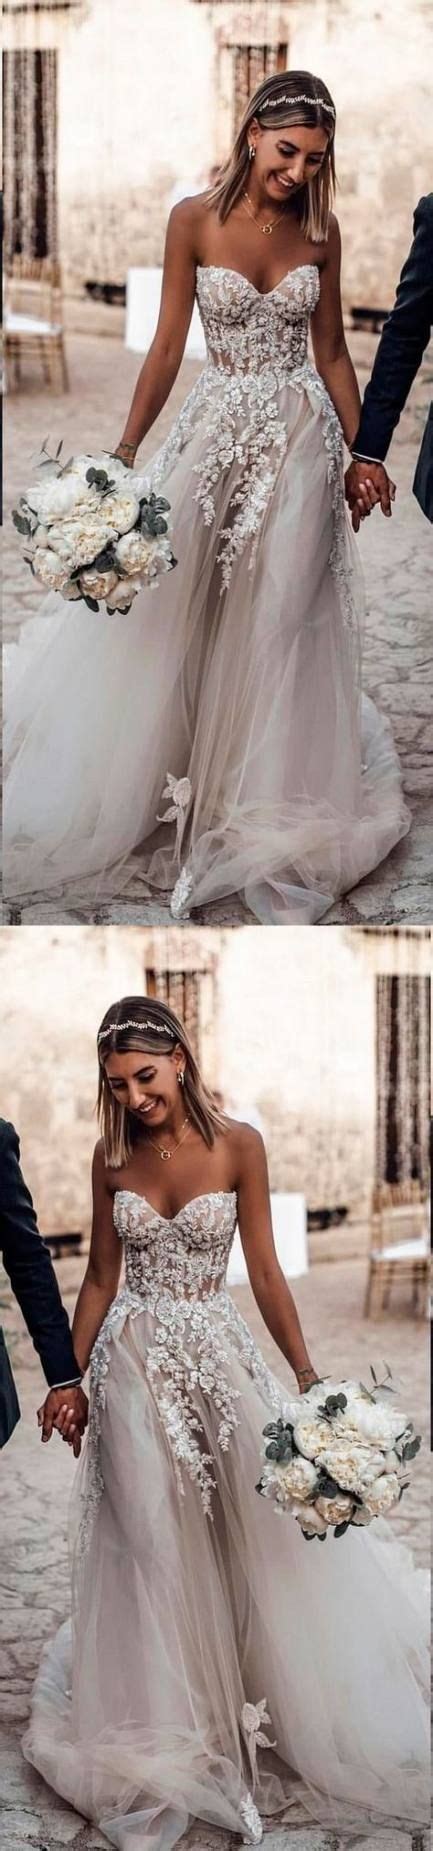 If you live in an incredibly hot destination, you may want to opt for a sleeveless wedding dress, but you can definitely embrace dresses with sleeves if the summers are mild. 67+ ideas wedding dresses rustic lace #wedding (With ...